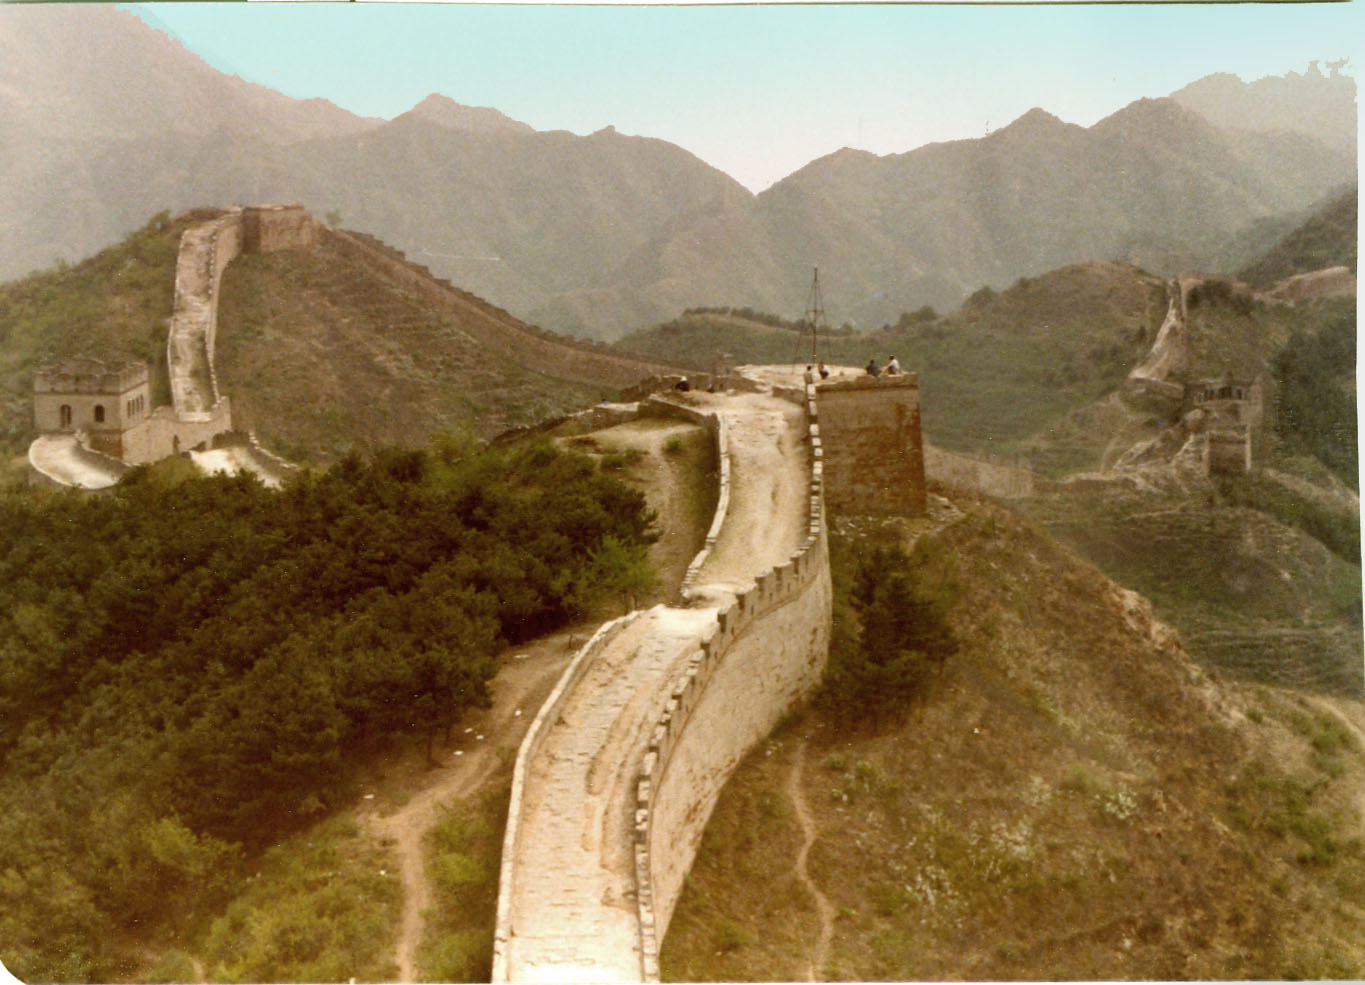 the Great Wall in need of repair